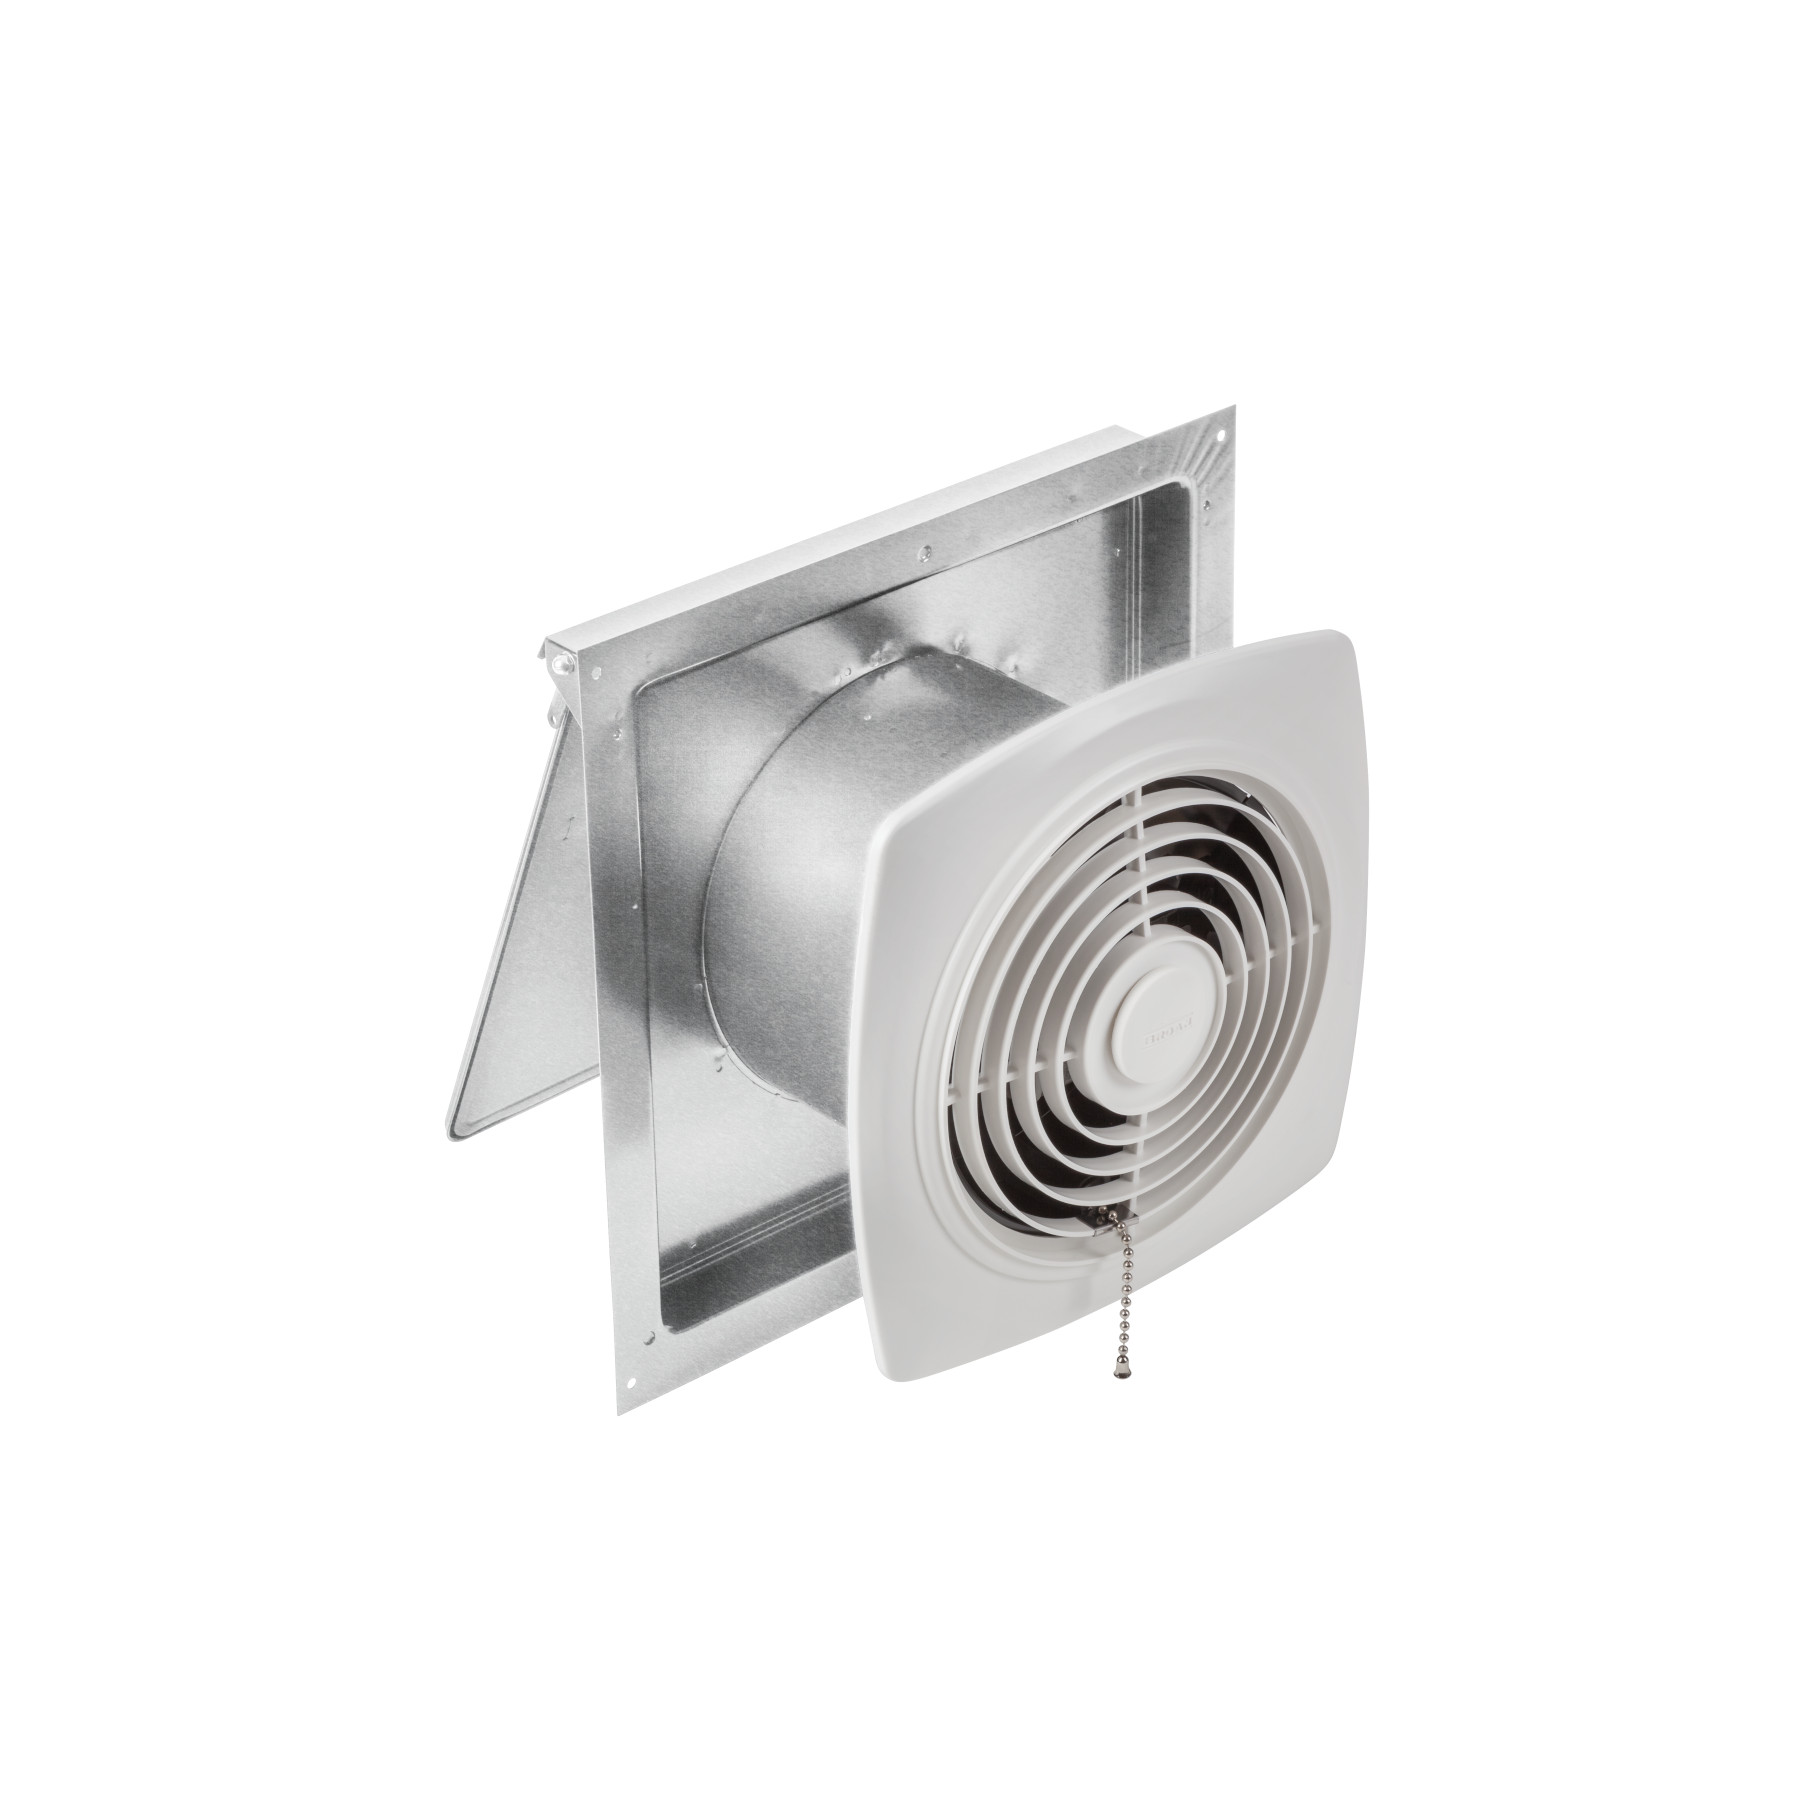 **DISCONTINUED** Broan® 430 CFM Chain-Operated, Through-Wall Ventilation Fan